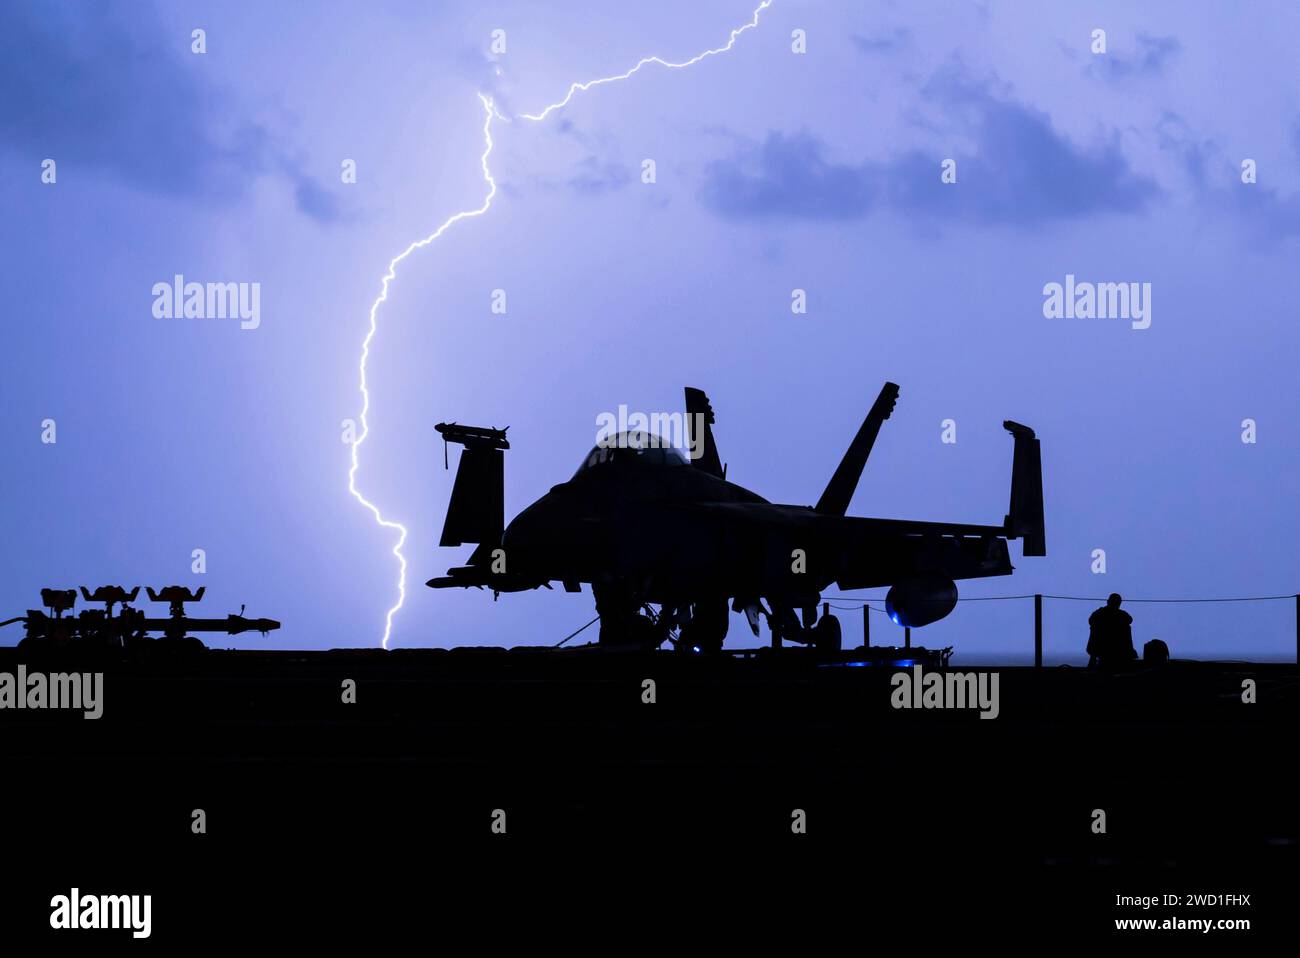 Lightning strikes near the aircraft carrier USS Theodore Roosevelt as it transits the Arabian Gulf. Stock Photo